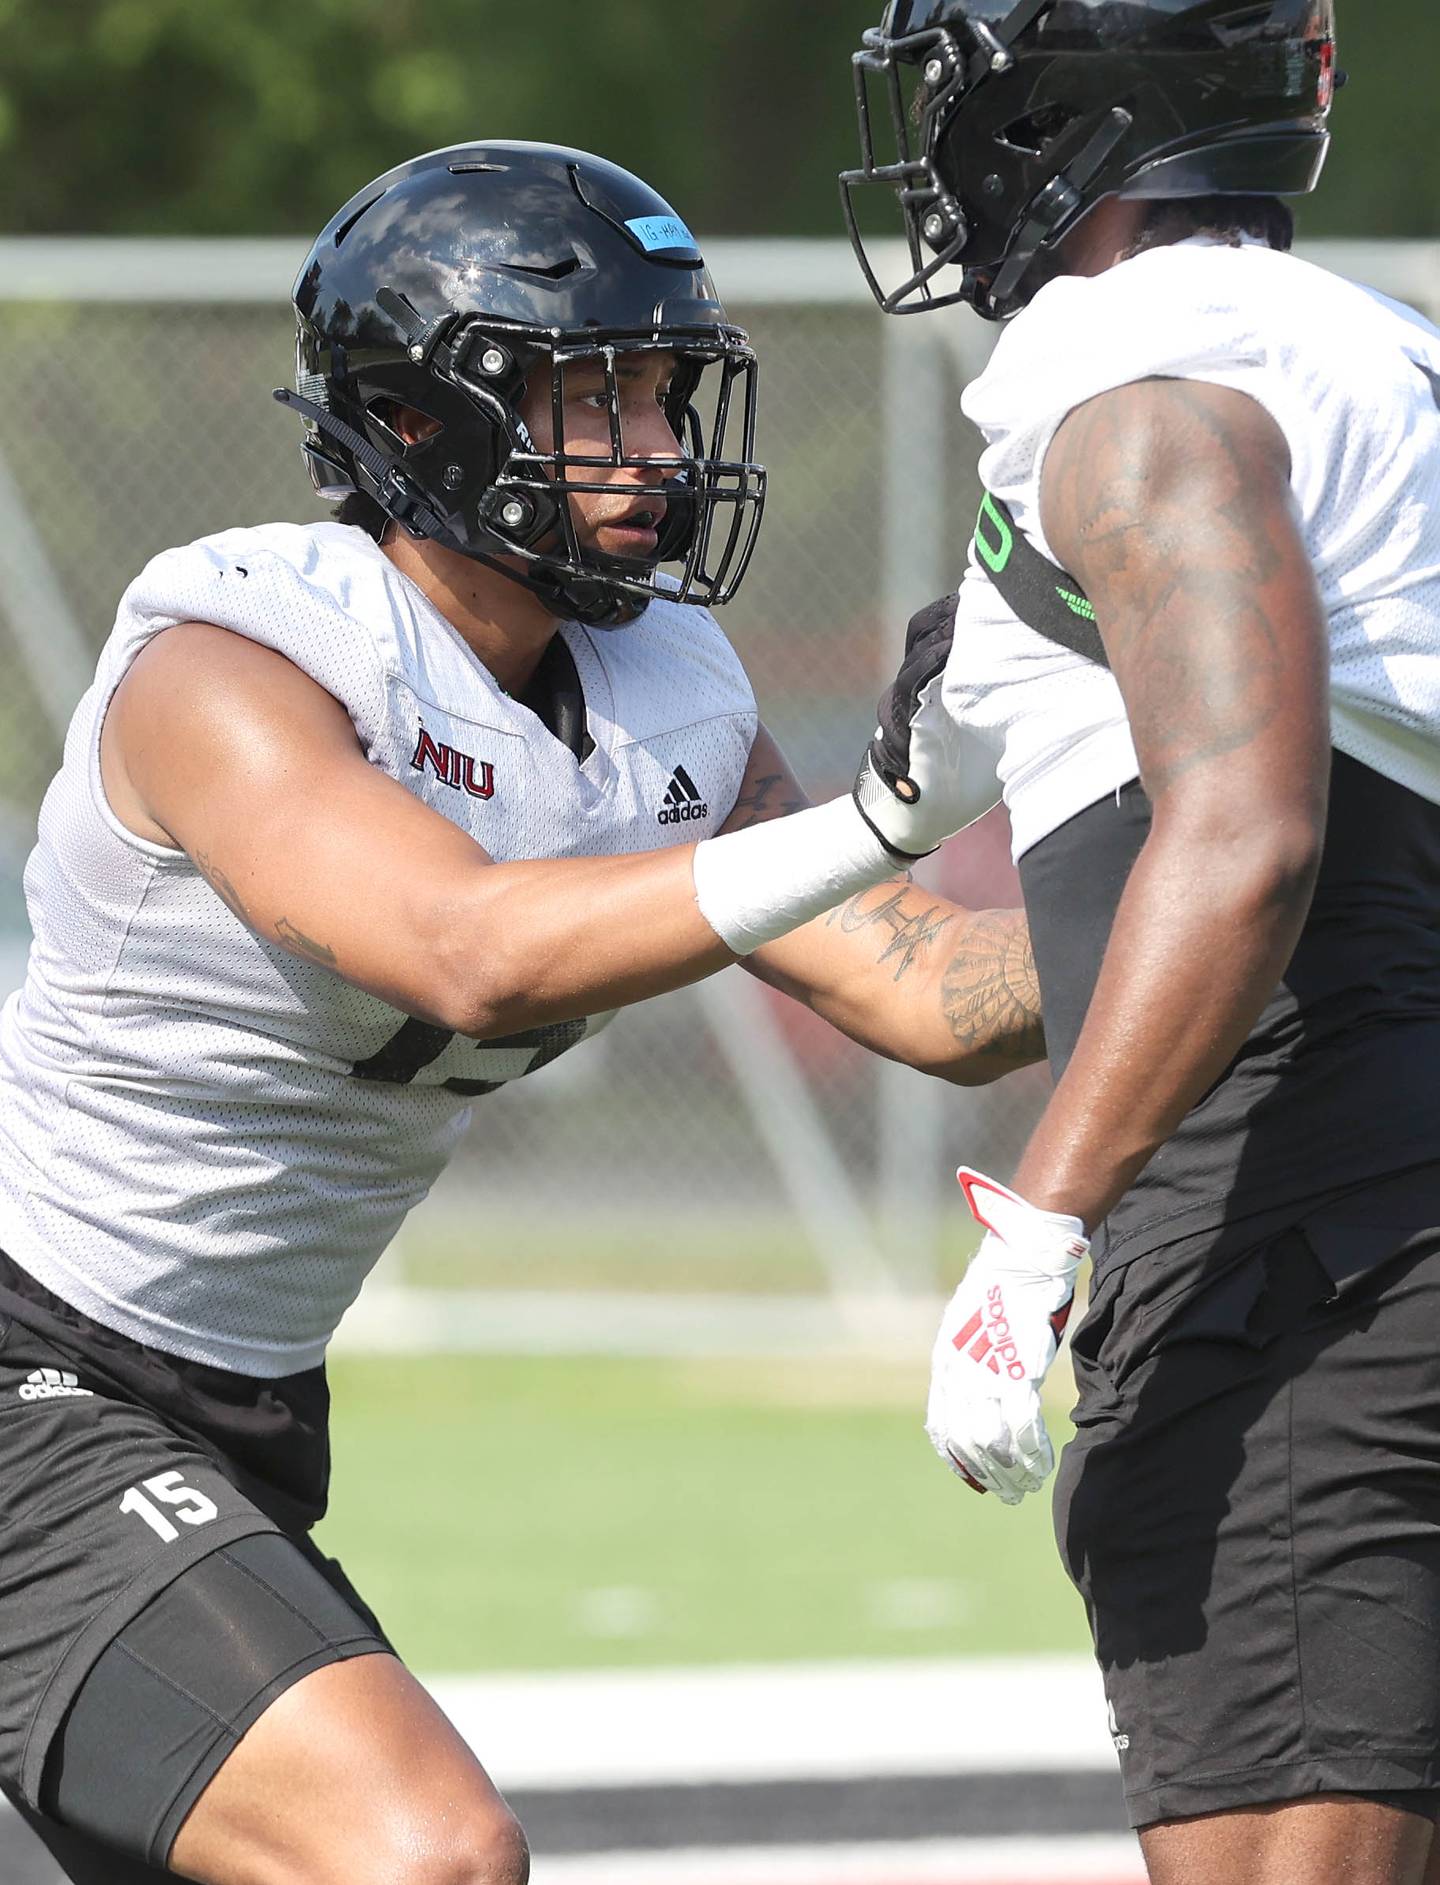 Northern Illinois University defensive ends Izayah Green-May (left) and Michael Kennedy take part in a drill Monday, August 1, 2022, during practice at Huskie Stadium in DeKalb.